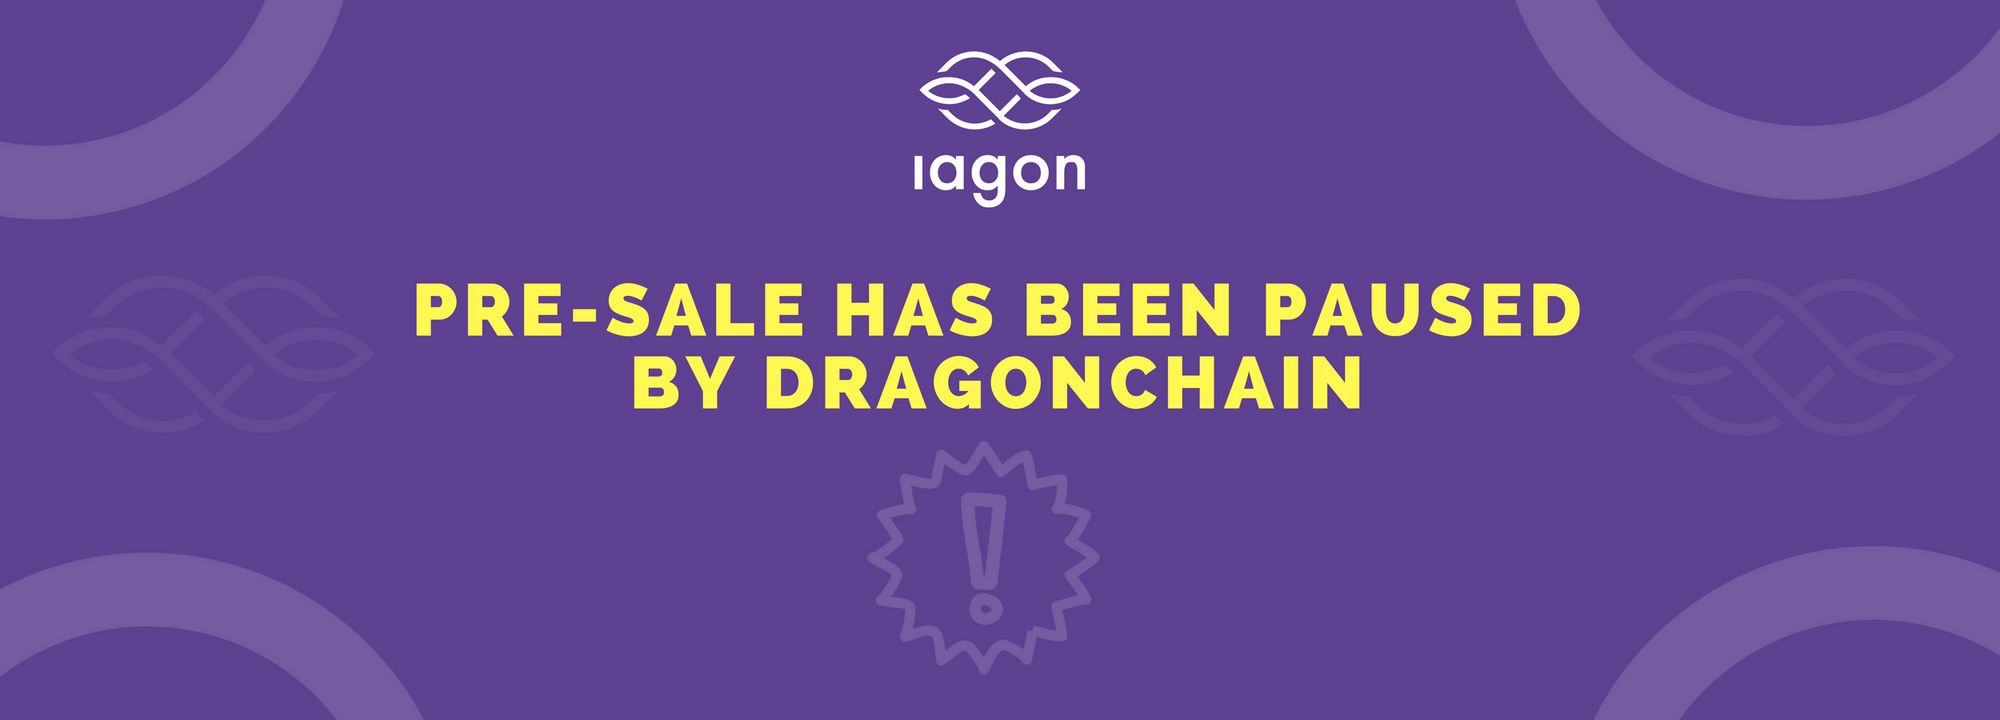 The IAGON Pre-Sale has been PAUSED by Dragonchain